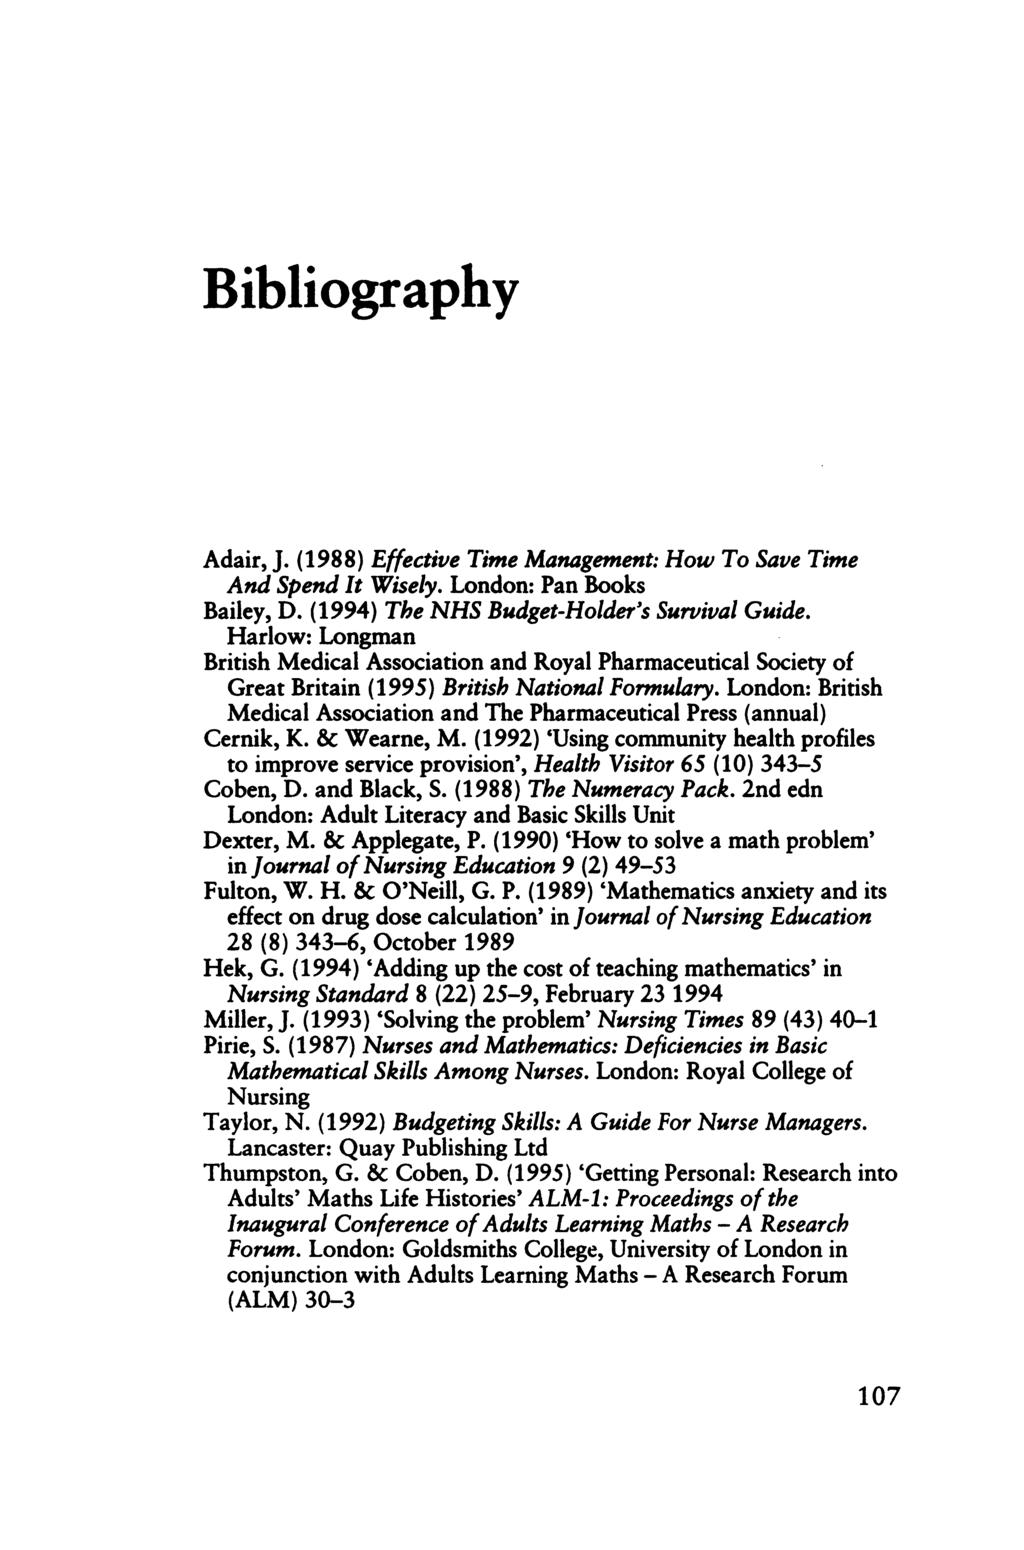 Bibliography Adair, J. (1988) Effective Time Management: How To Save Time And Spend It Wisely. London: Pan Books Bailey, D. (1994) The NHS Budget-Holder's Survival Guide.